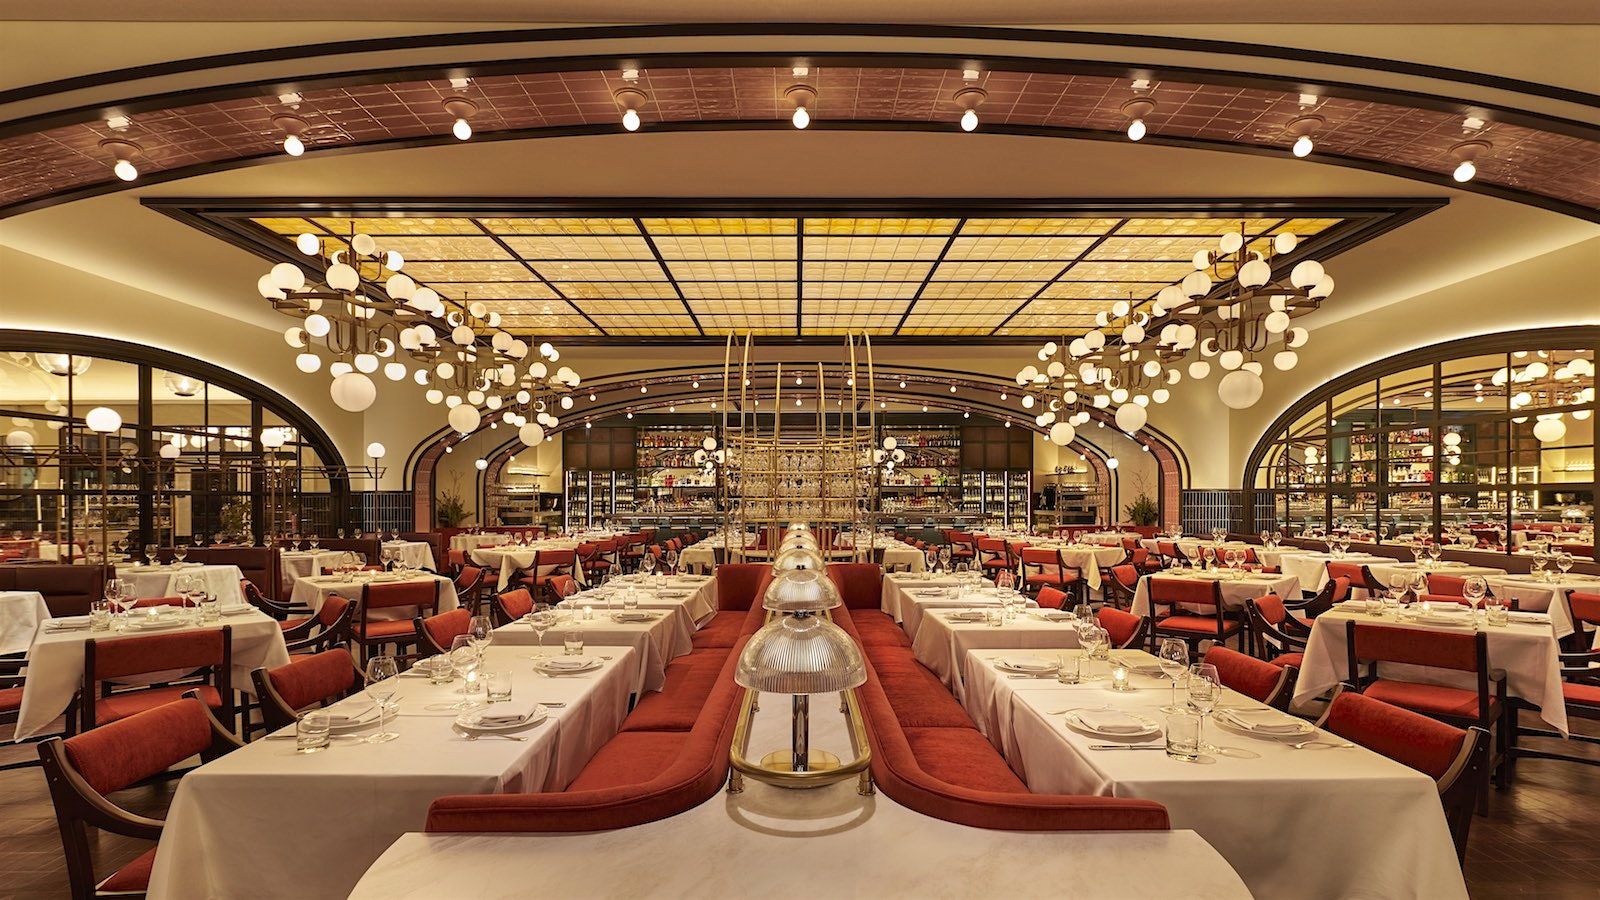  The French brasserie–inspired dining room at Le Select in Chicago, with detailed such as tiled ceiling arches and mirrored walls